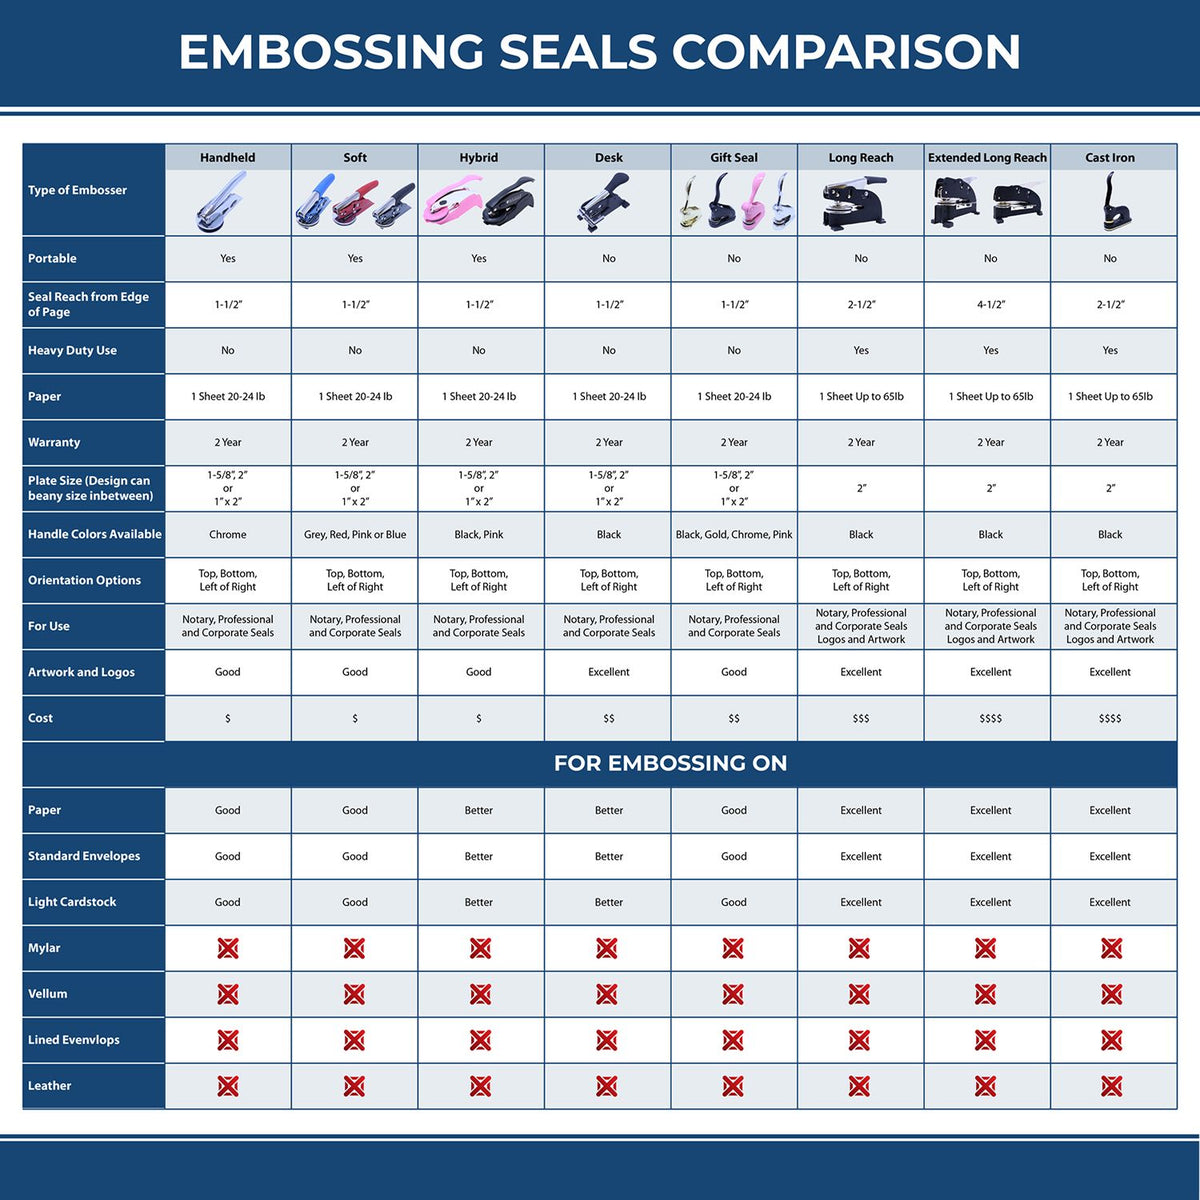 A comparison chart for the different types of mount models available for the Extended Long Reach Iowa Architect Seal Embosser.